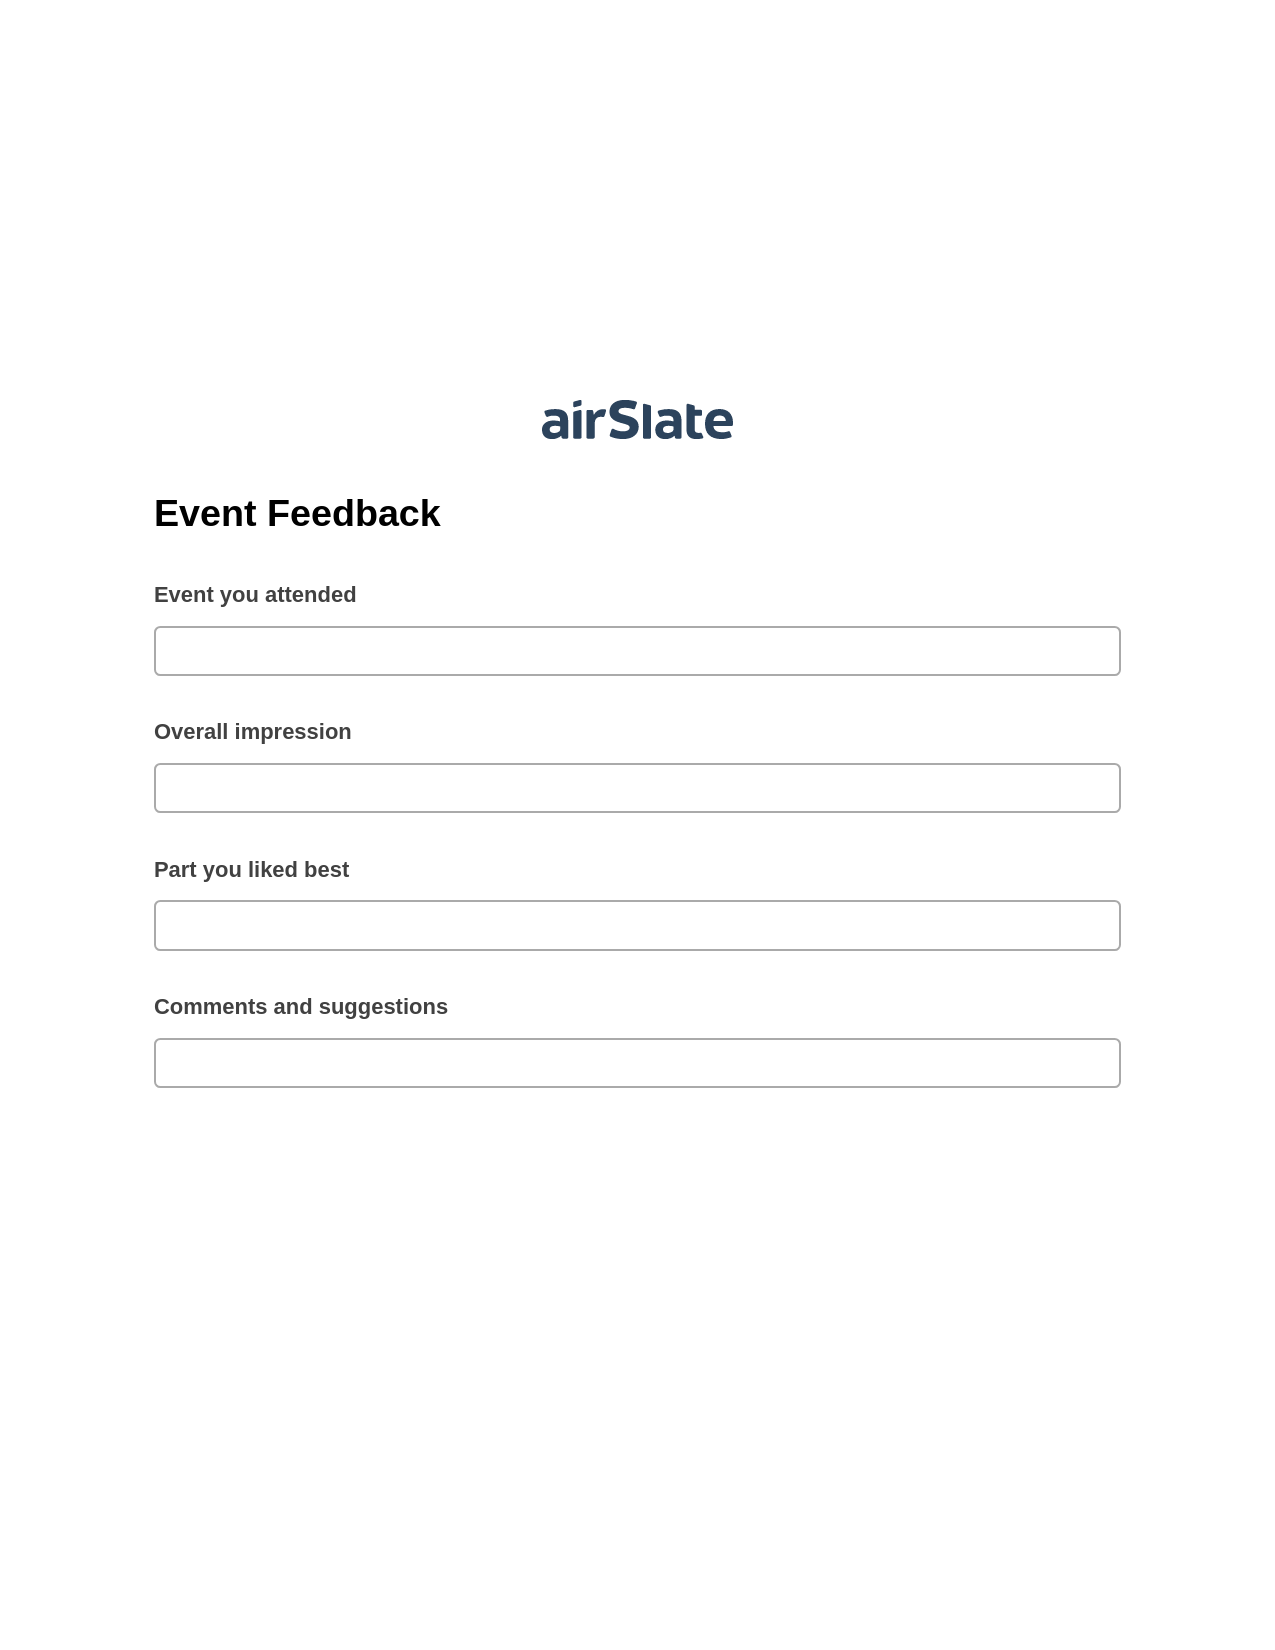 Event Feedback Pre-fill from Salesforce Record Bot, Export to MS Dynamics 365 Bot, Export to Excel 365 Bot